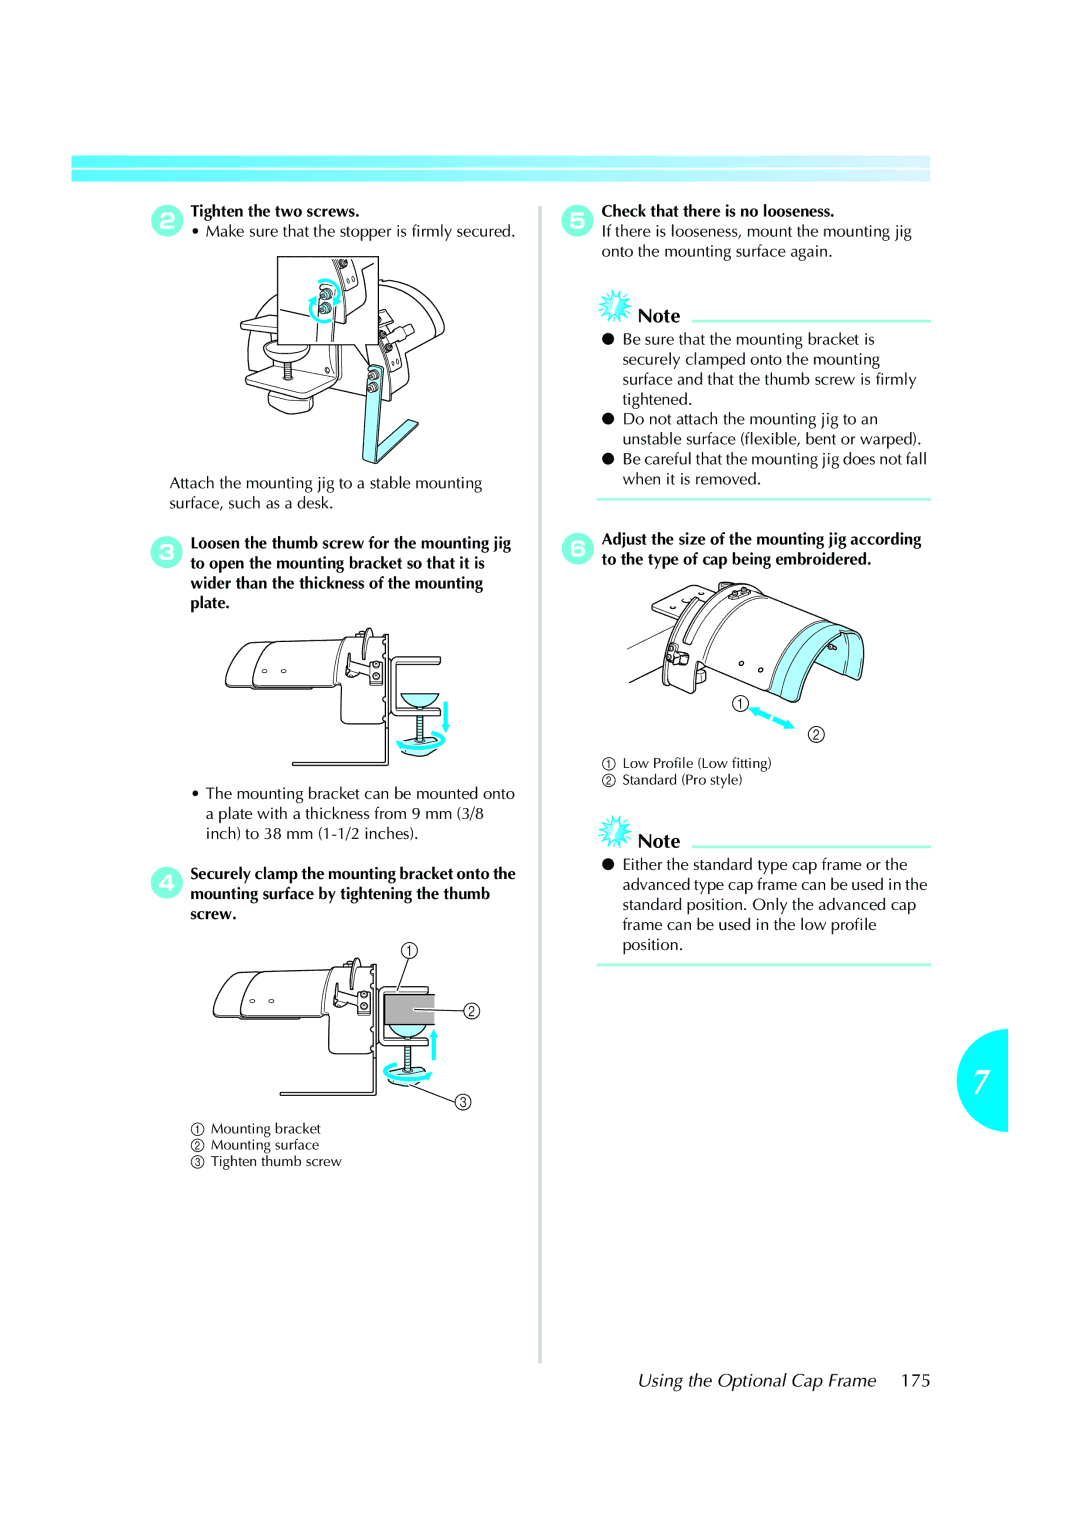 Brother PR-620 operation manual 2Tighten the two screws, Check that there is no looseness 